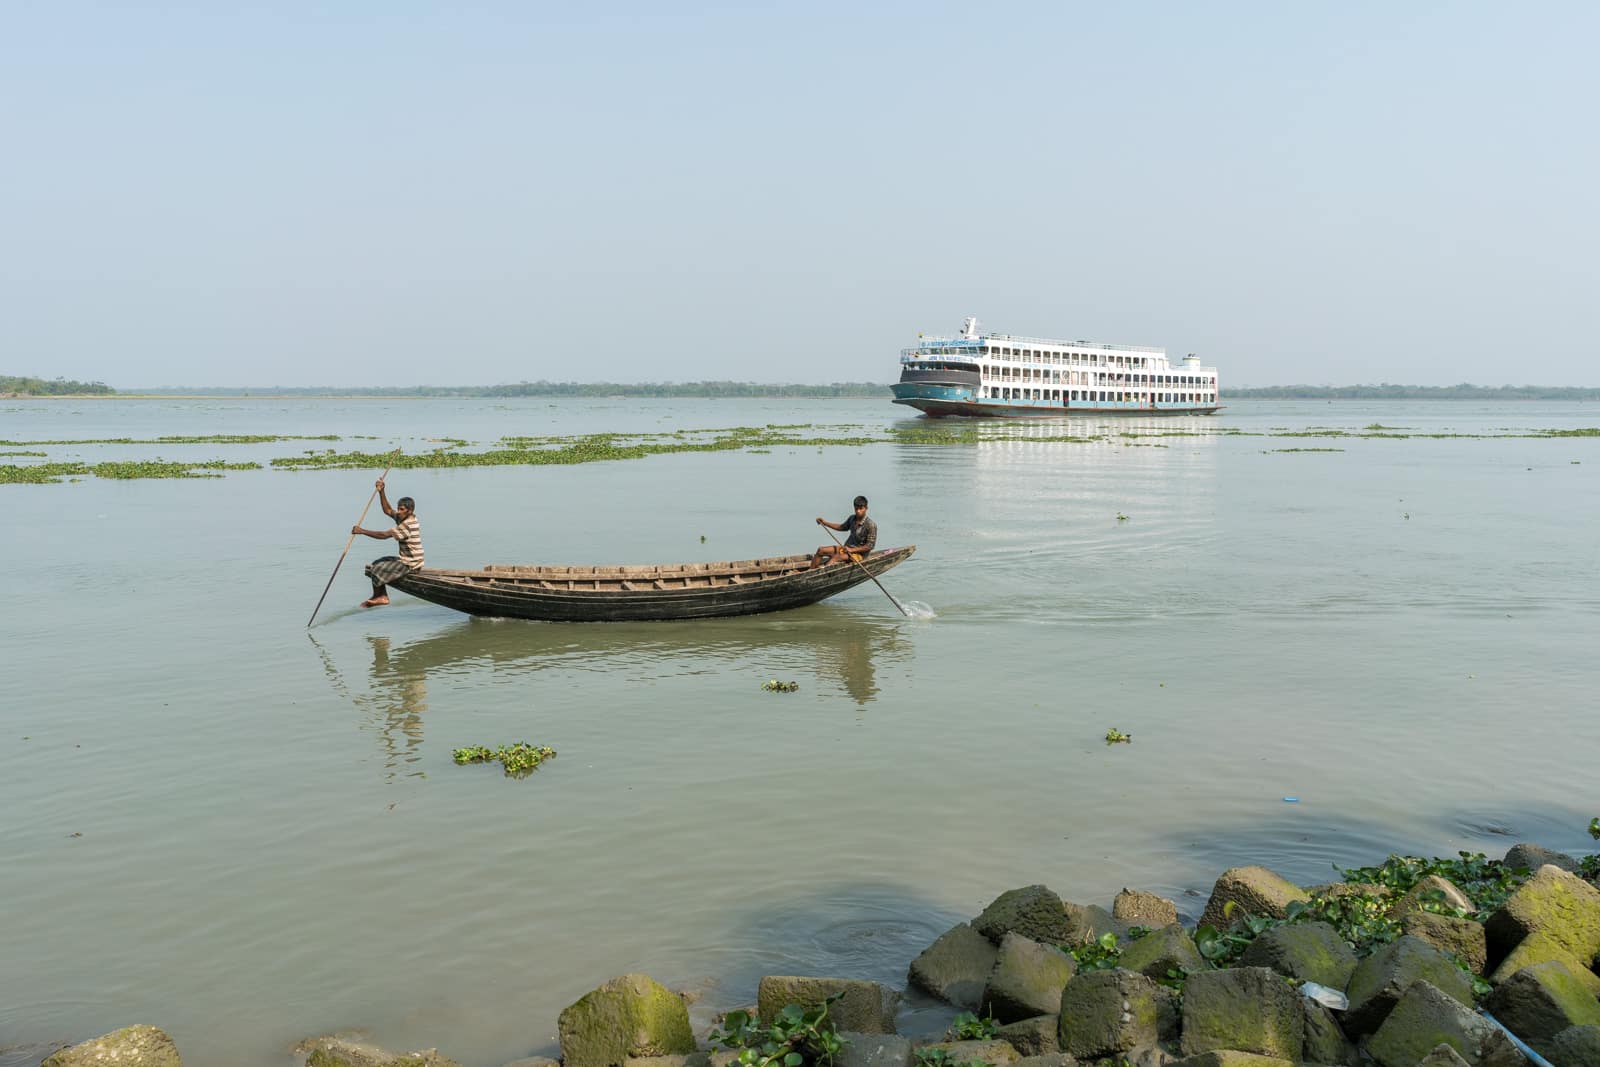 Launches from Hularhat to Dhaka, Bangladesh - Approaching launch behind a fishing boat - Lost With Purpose travel blog